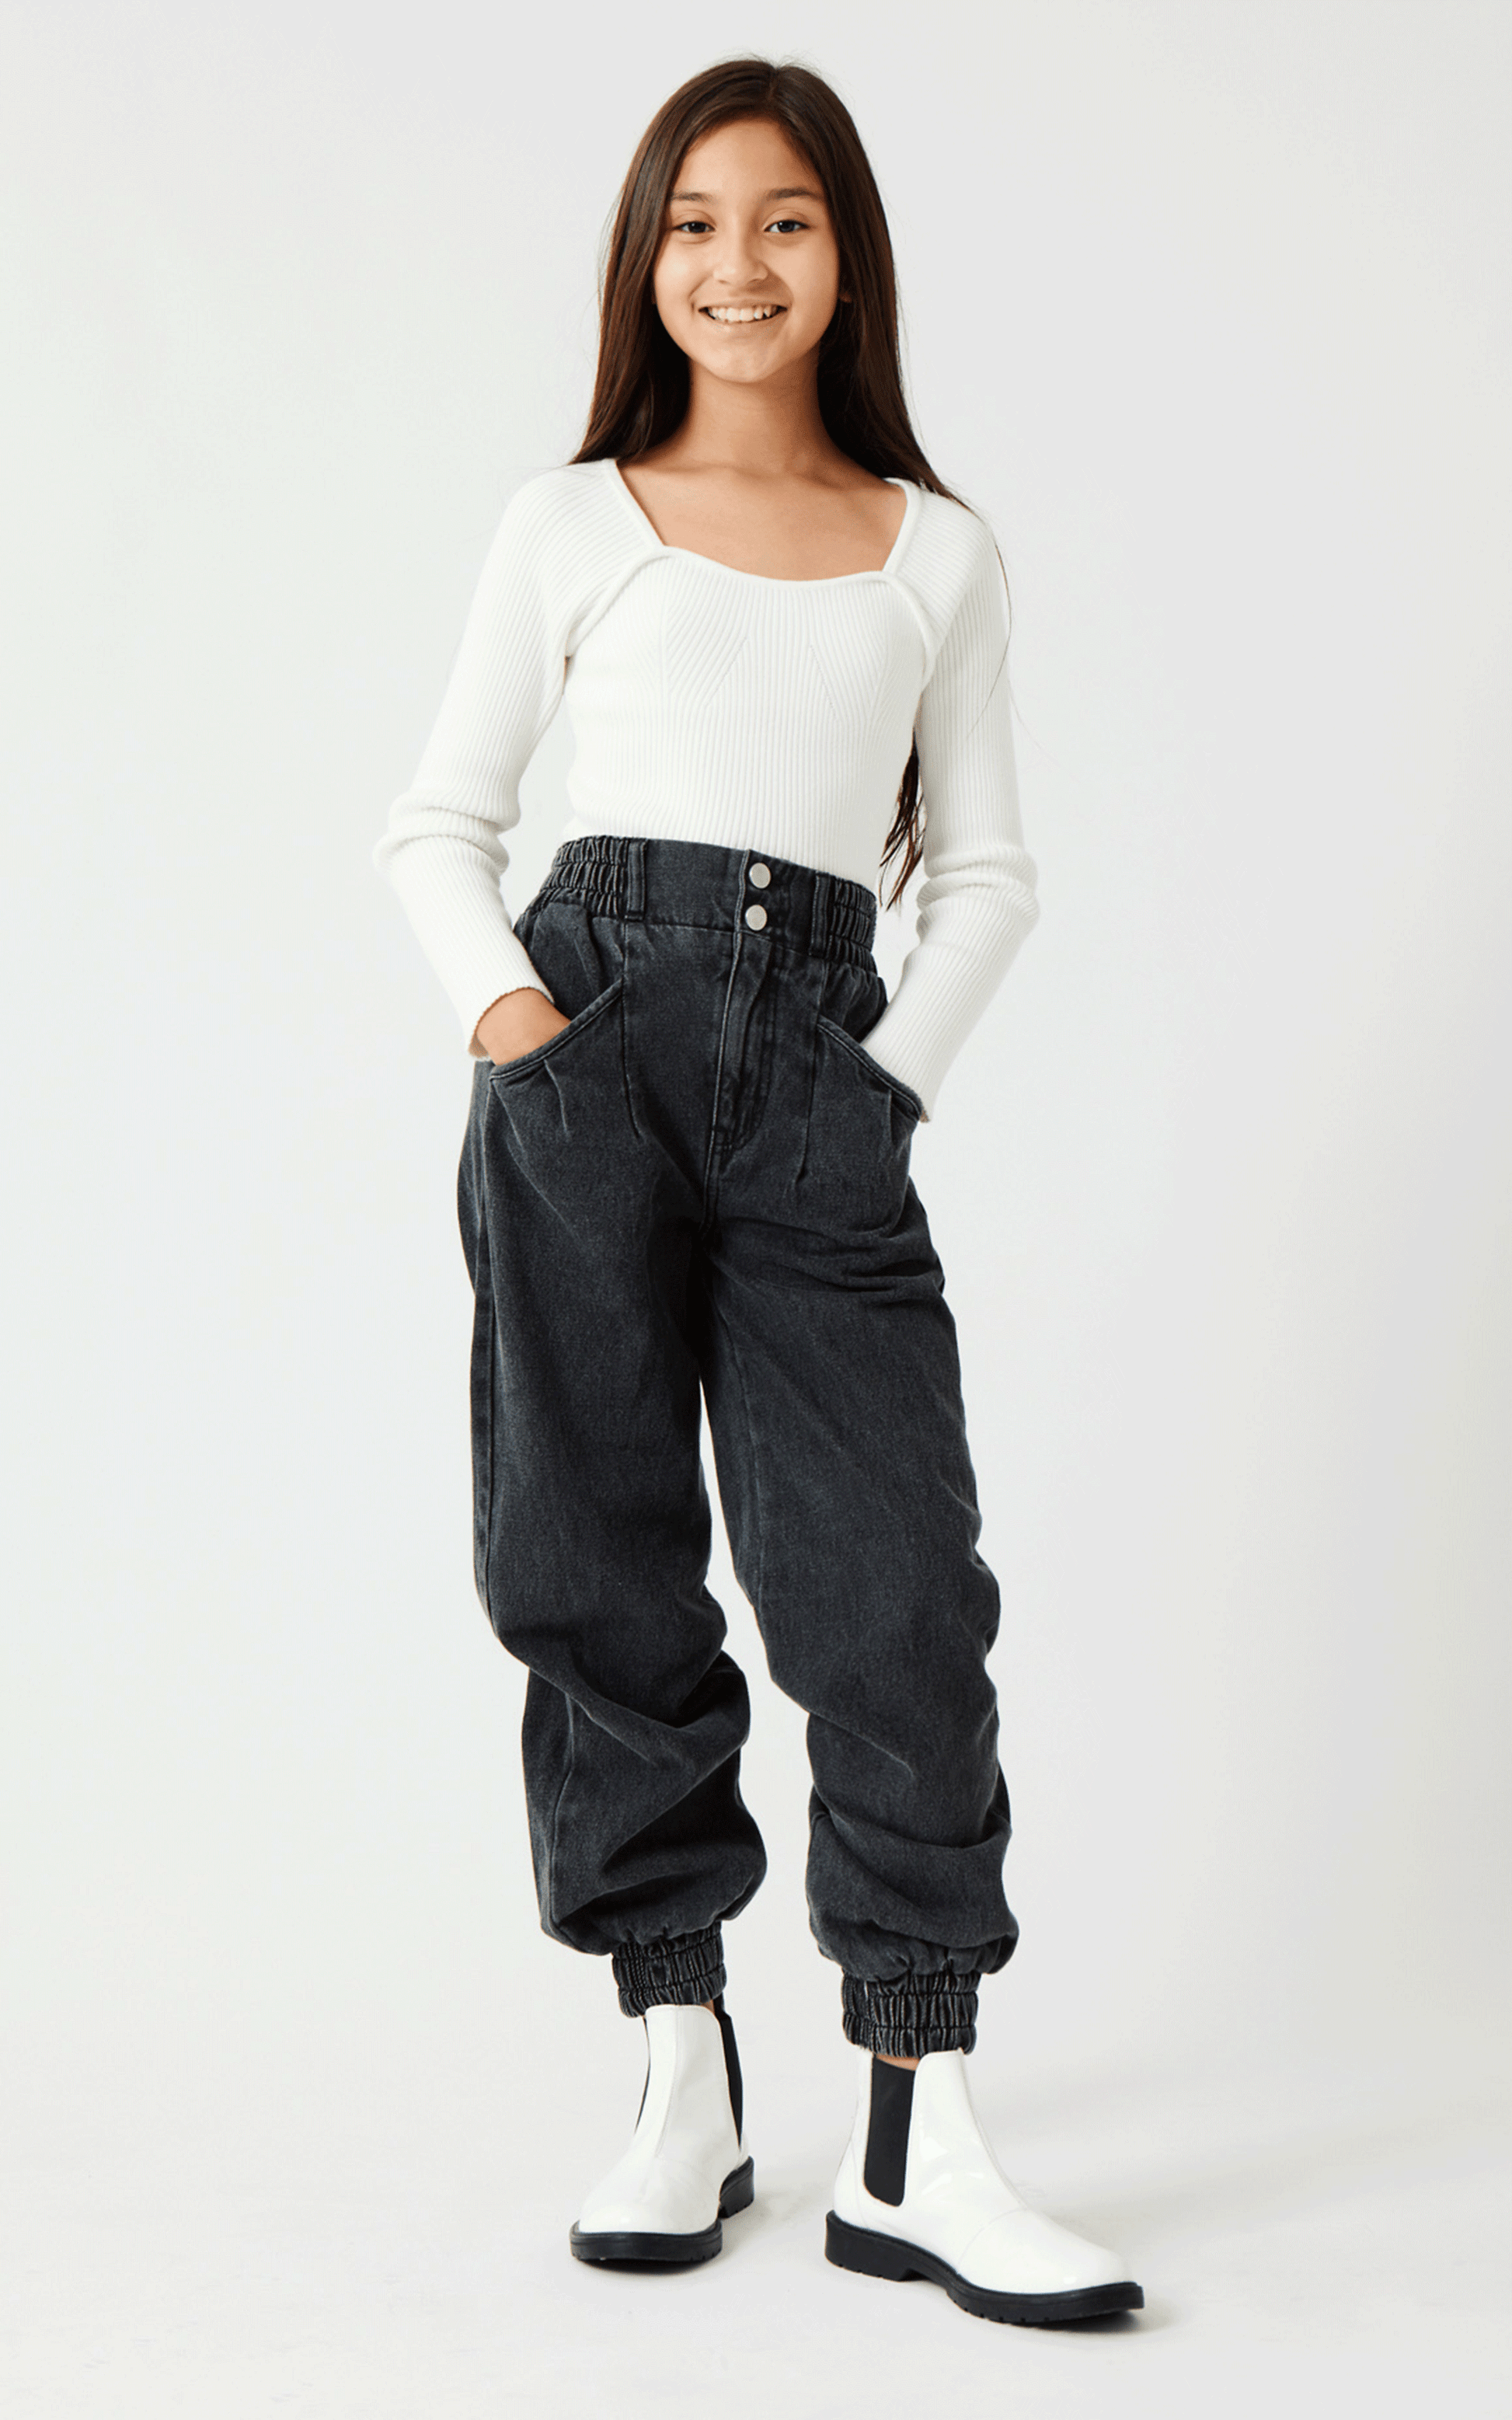 GIRL IN WHITE LONG-SLEEVE RIBBED SHIRT AND WASHED OUT BLACK DENIM PANTS WITH RUCHED ELASTIC WAISTBAND AND CUFFED ANKLES